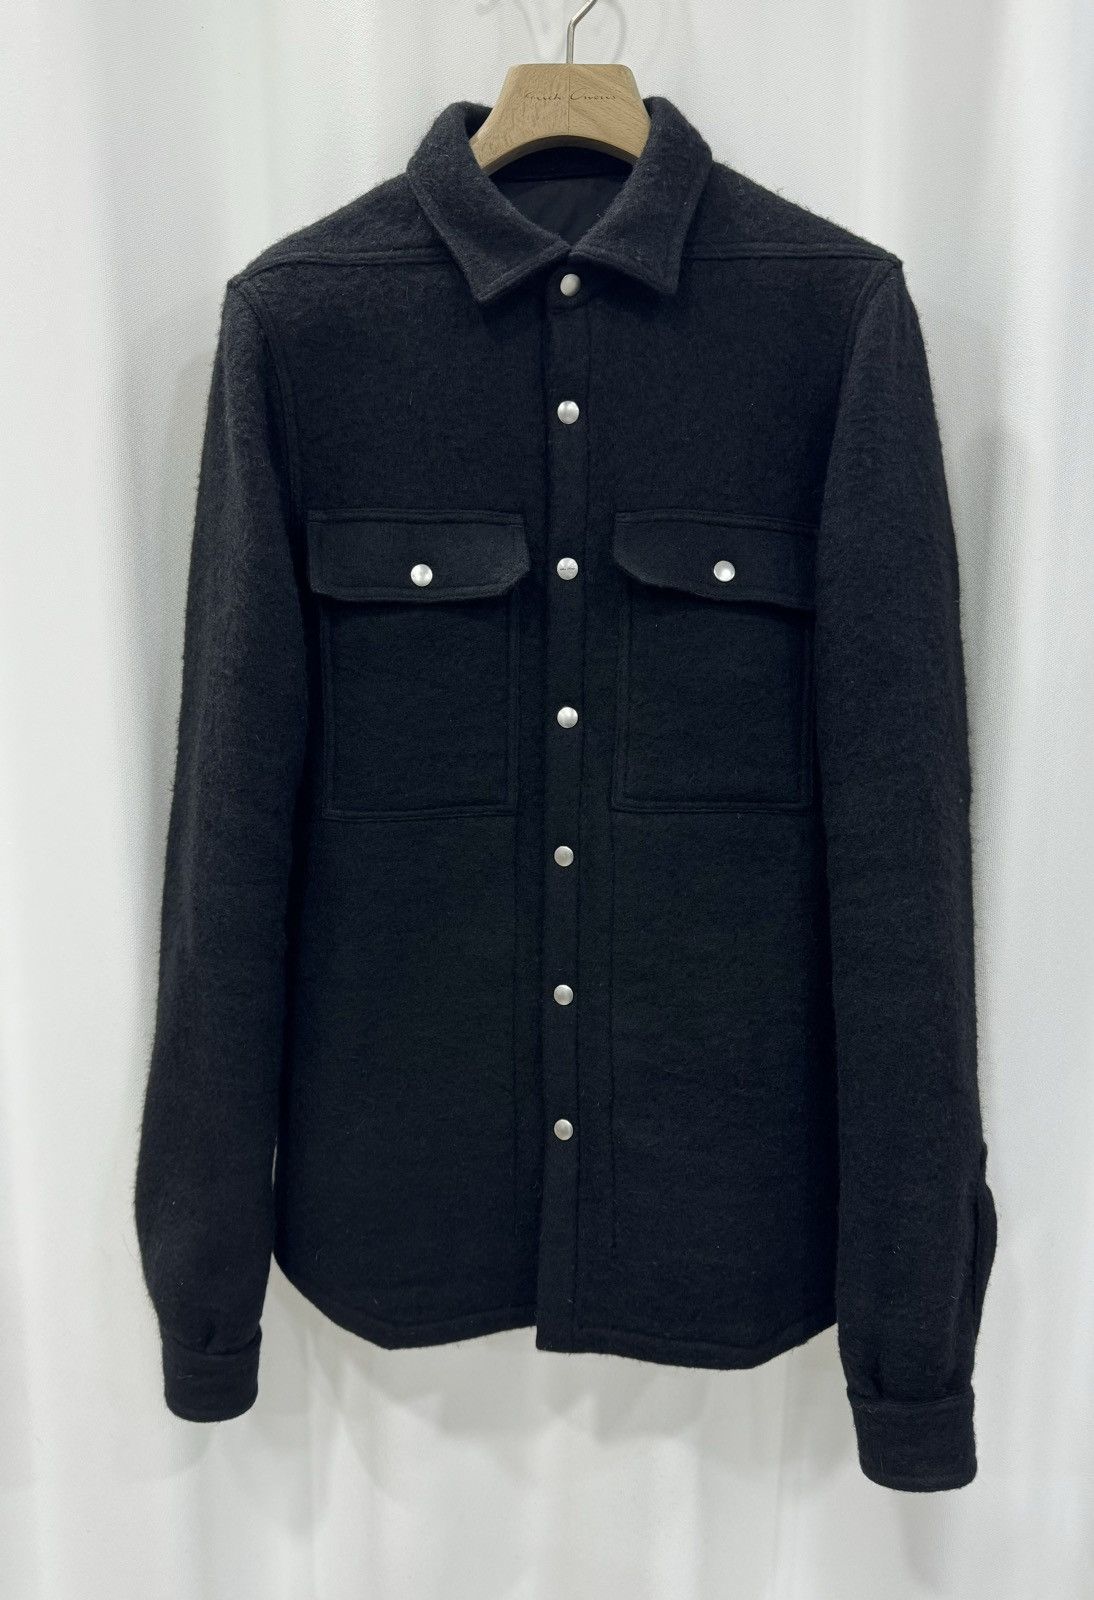 Pre-owned Rick Owens Black Wool Outer Shirt 46 Boiled Wool